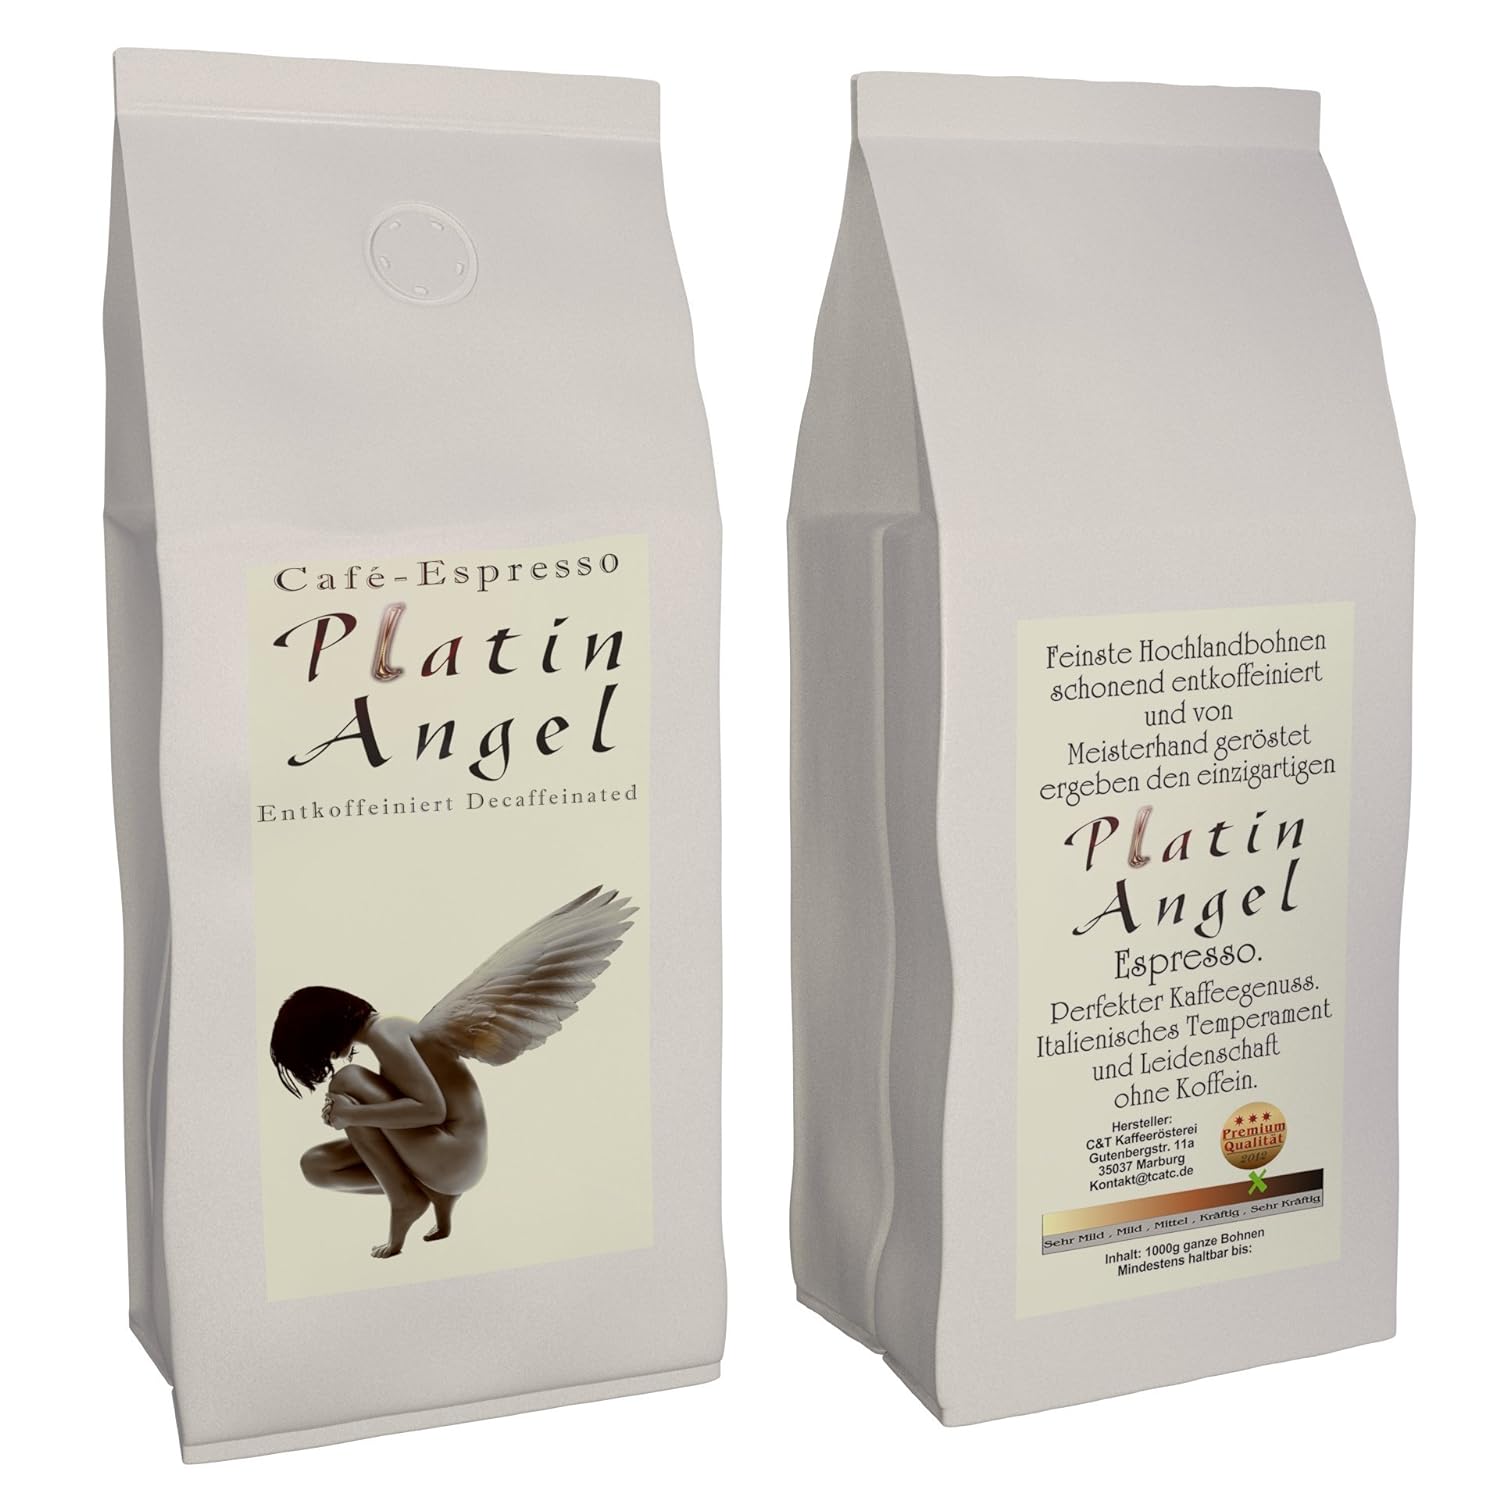 Espresso / Cafe - Coffee Beans Decaffeinated \"Platinum Angel\" Whole Beans, 500 g) - Low Acid - Gentle and Freshly Roasted